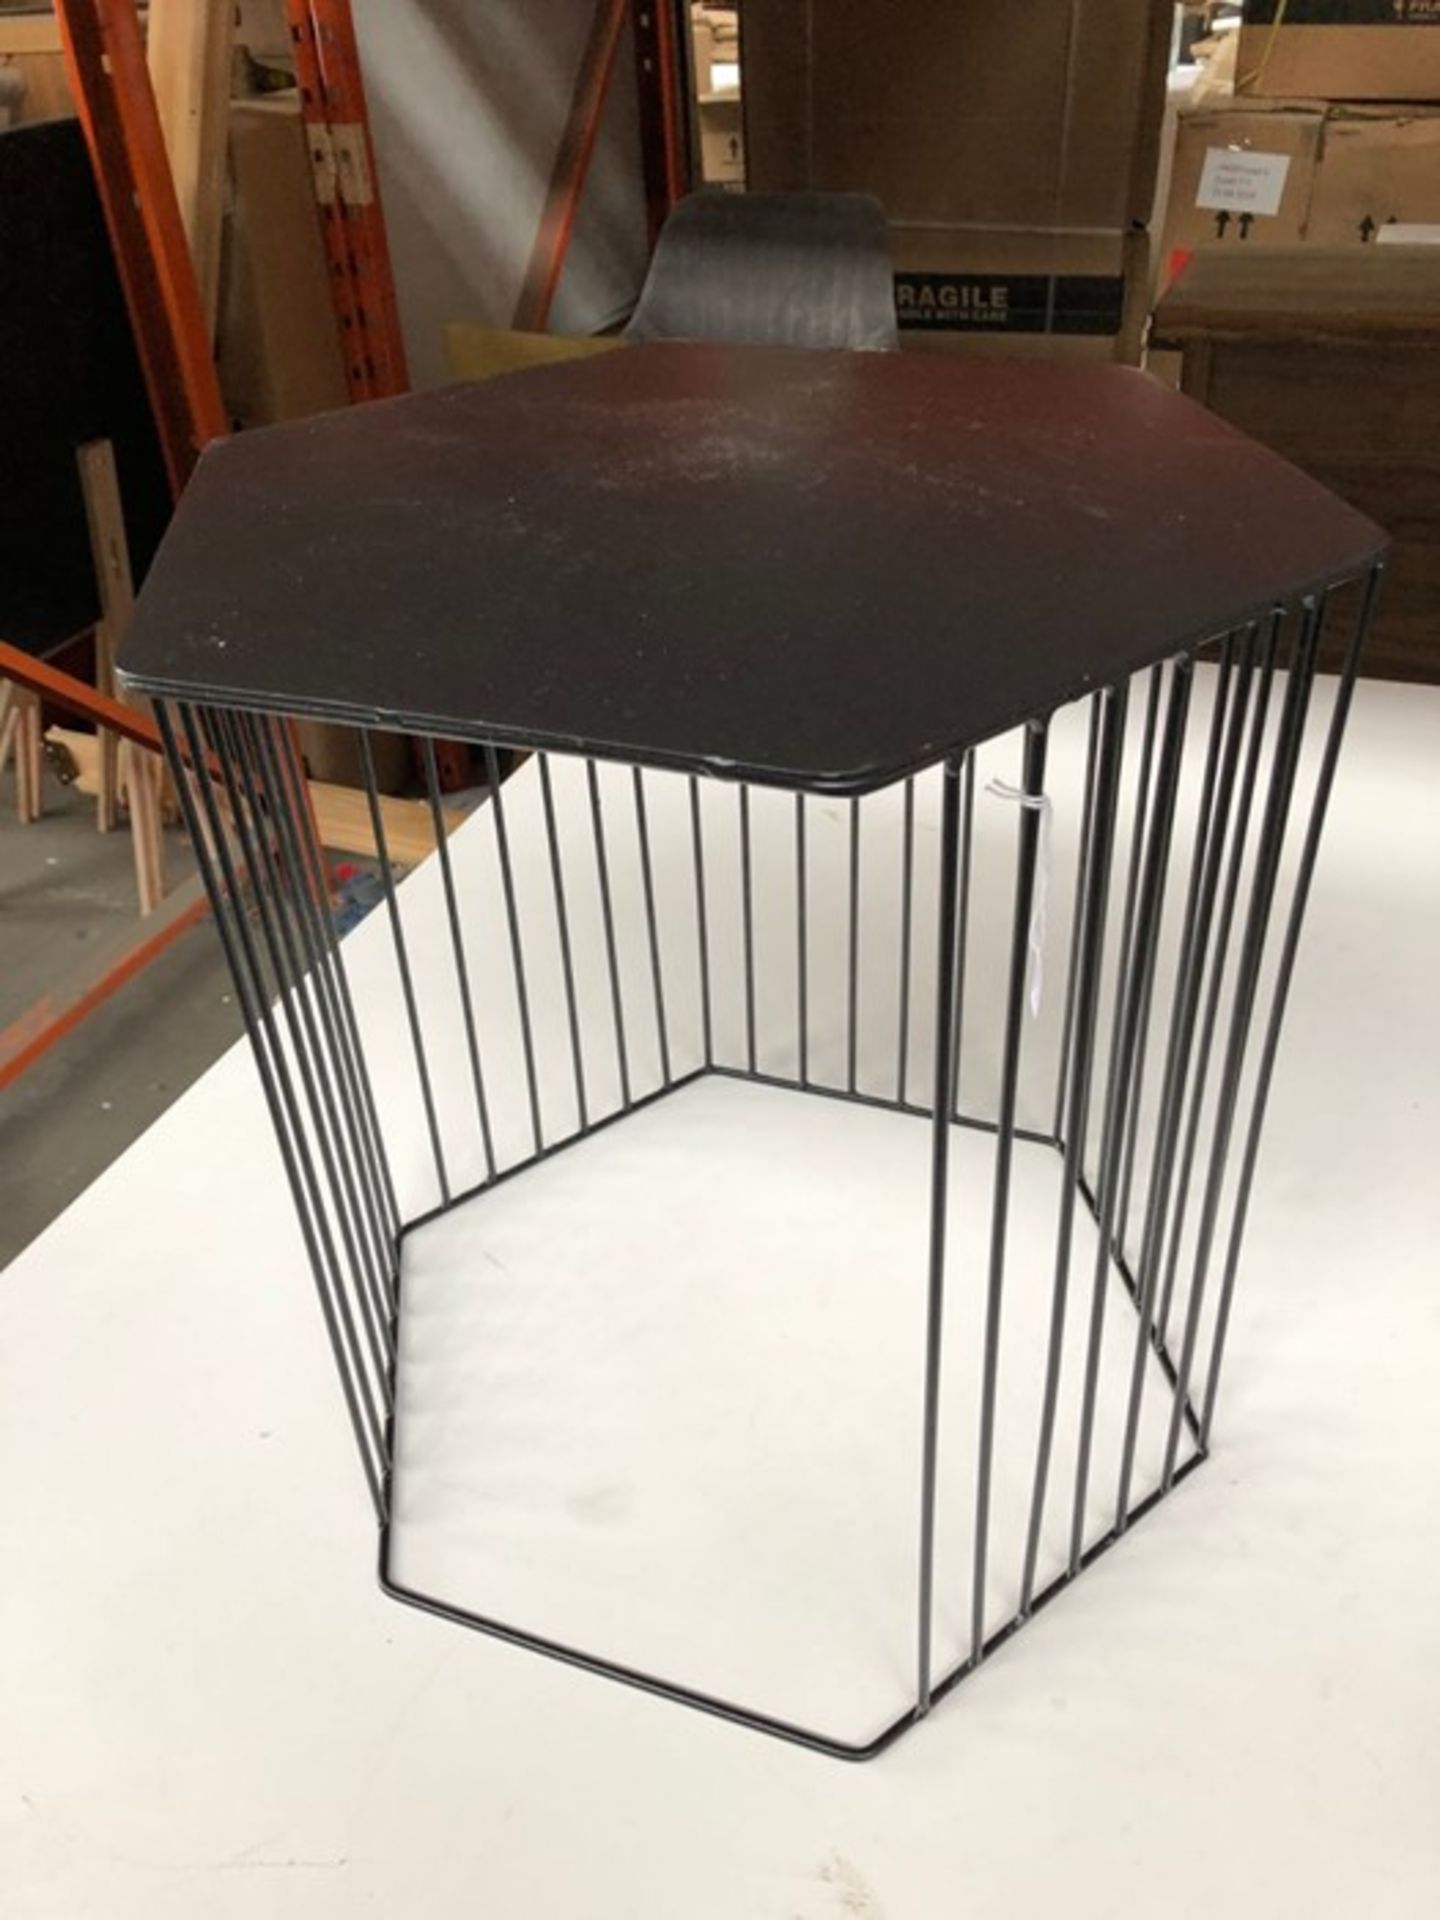 1 CAGE LIKE METAL SIDE TABLE IN BLACK (SOLD AS SEEN)